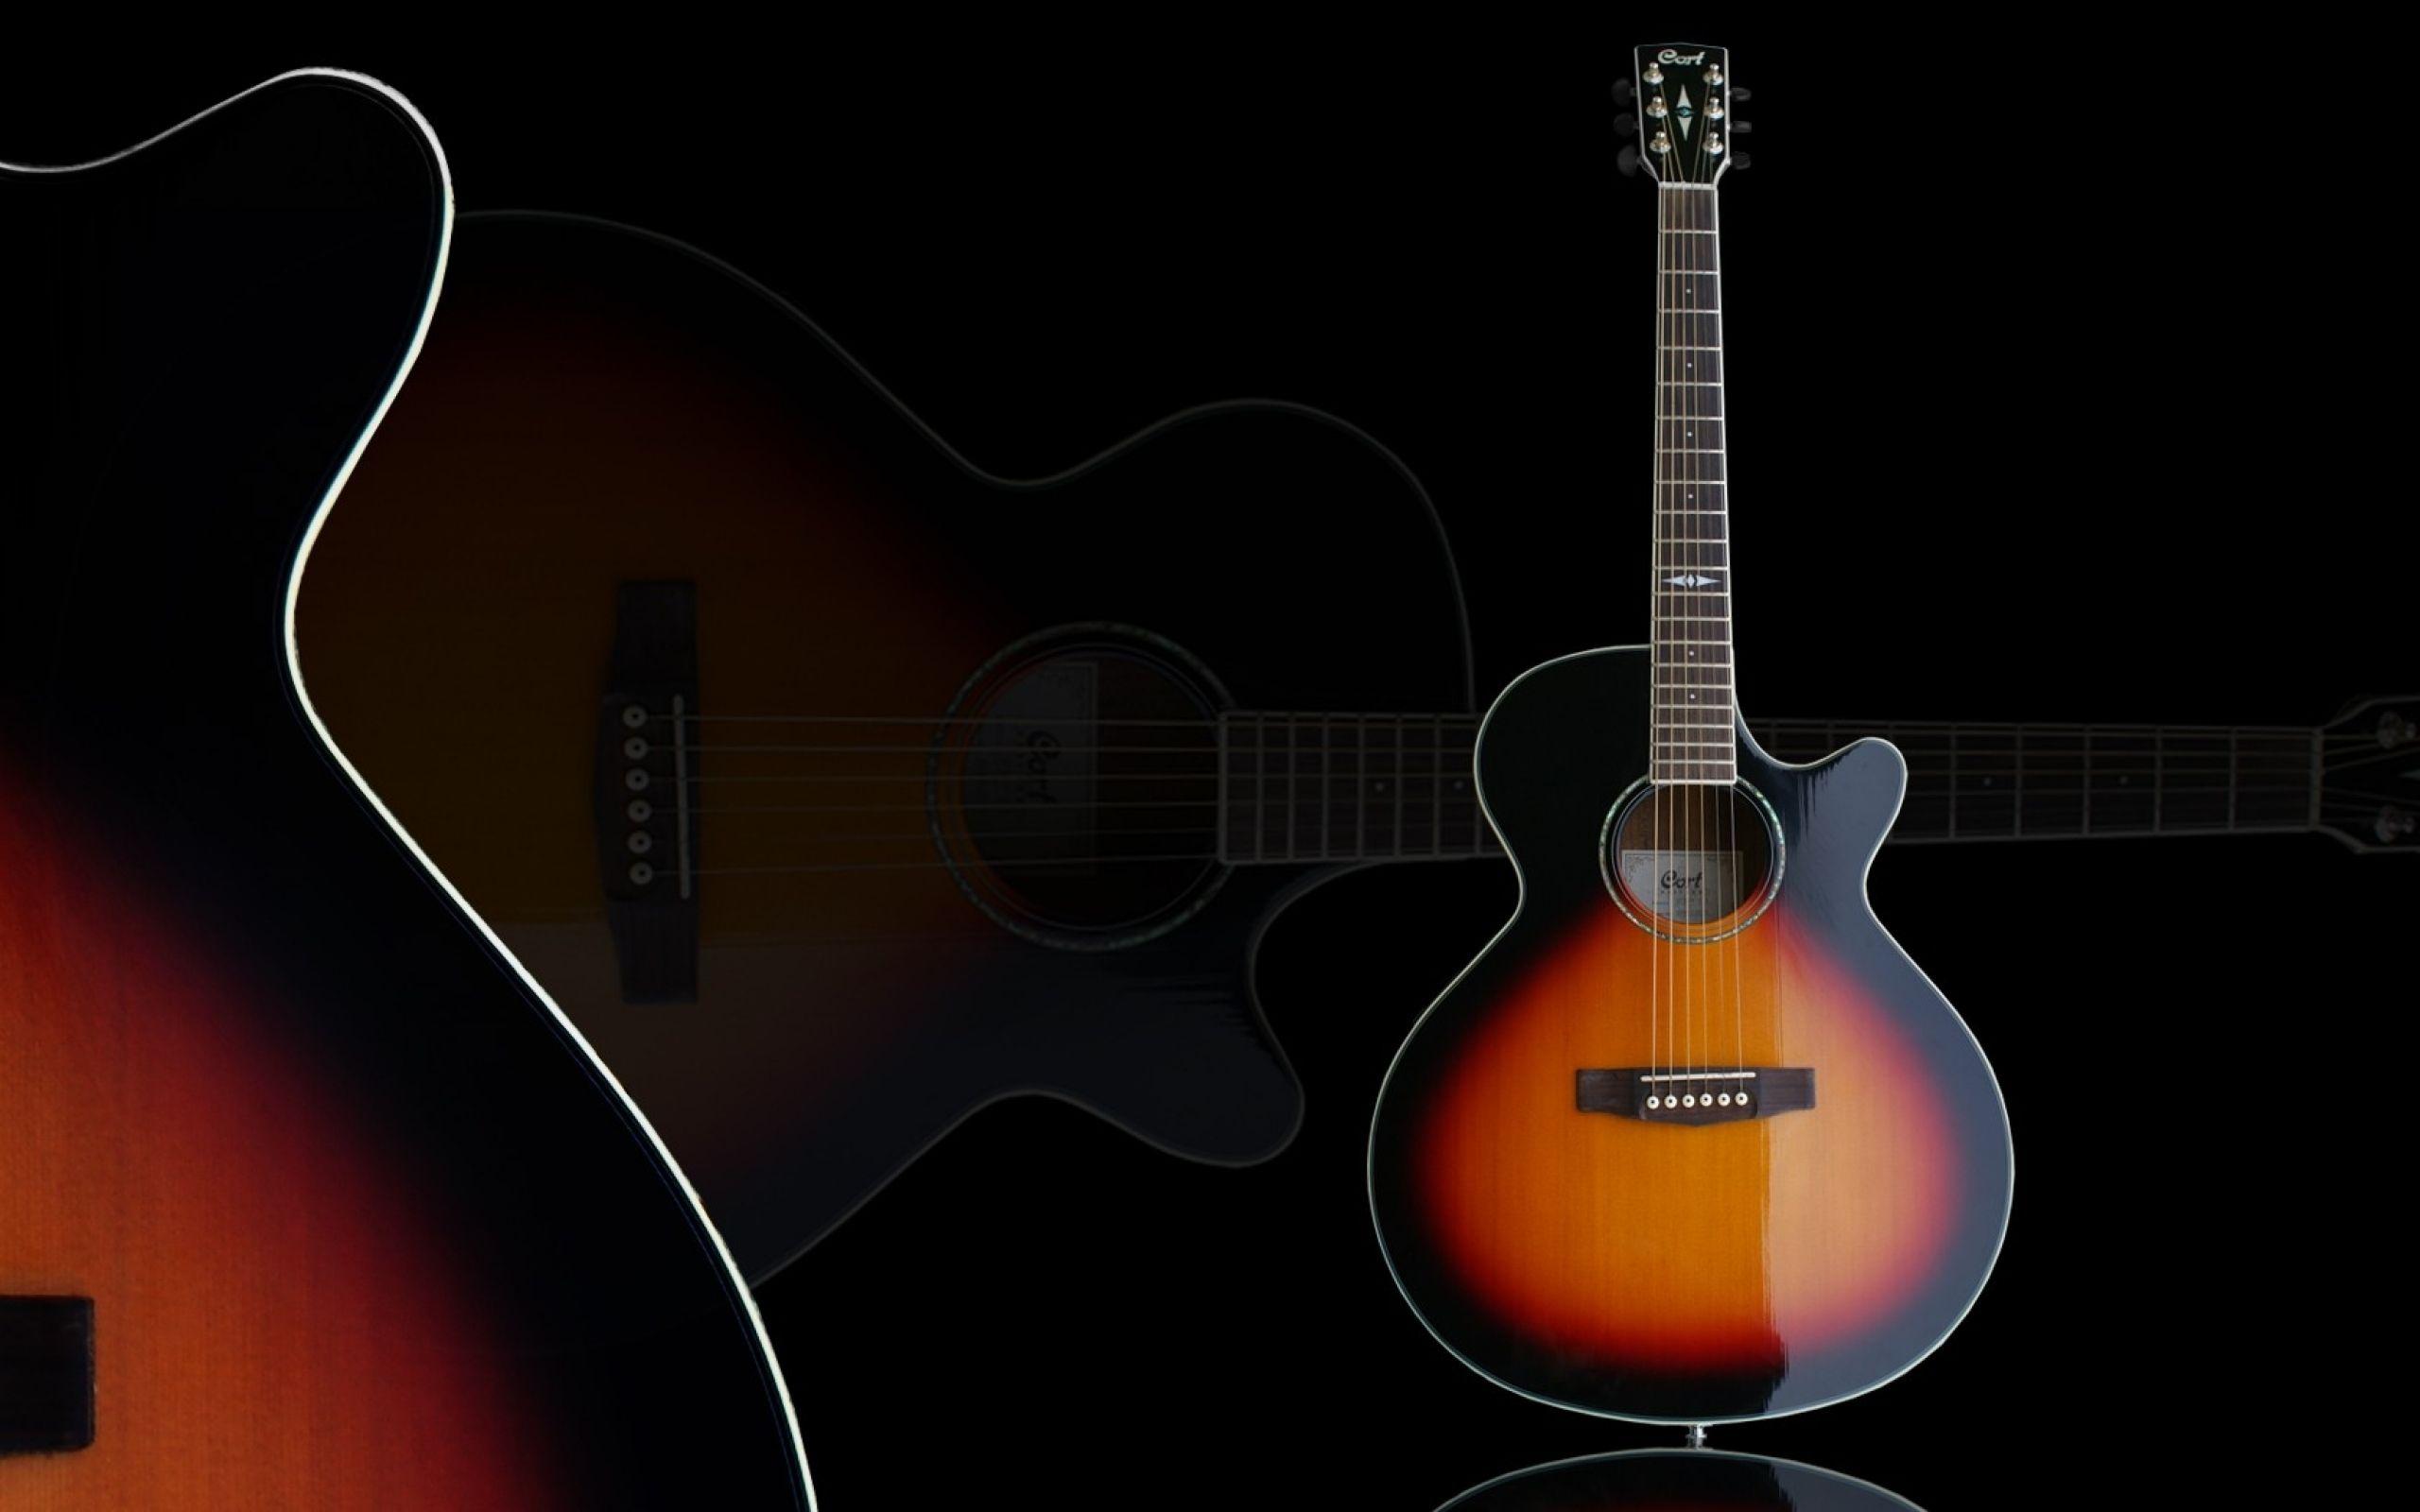 Acoustic Guitar Music Wallpaper HD Background. FEEL THE MUSIC